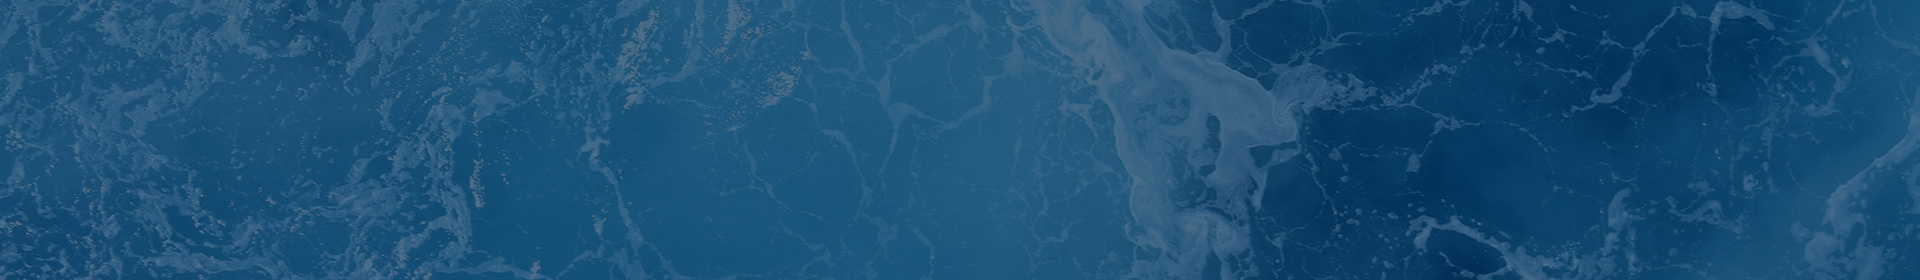 Blue water background image